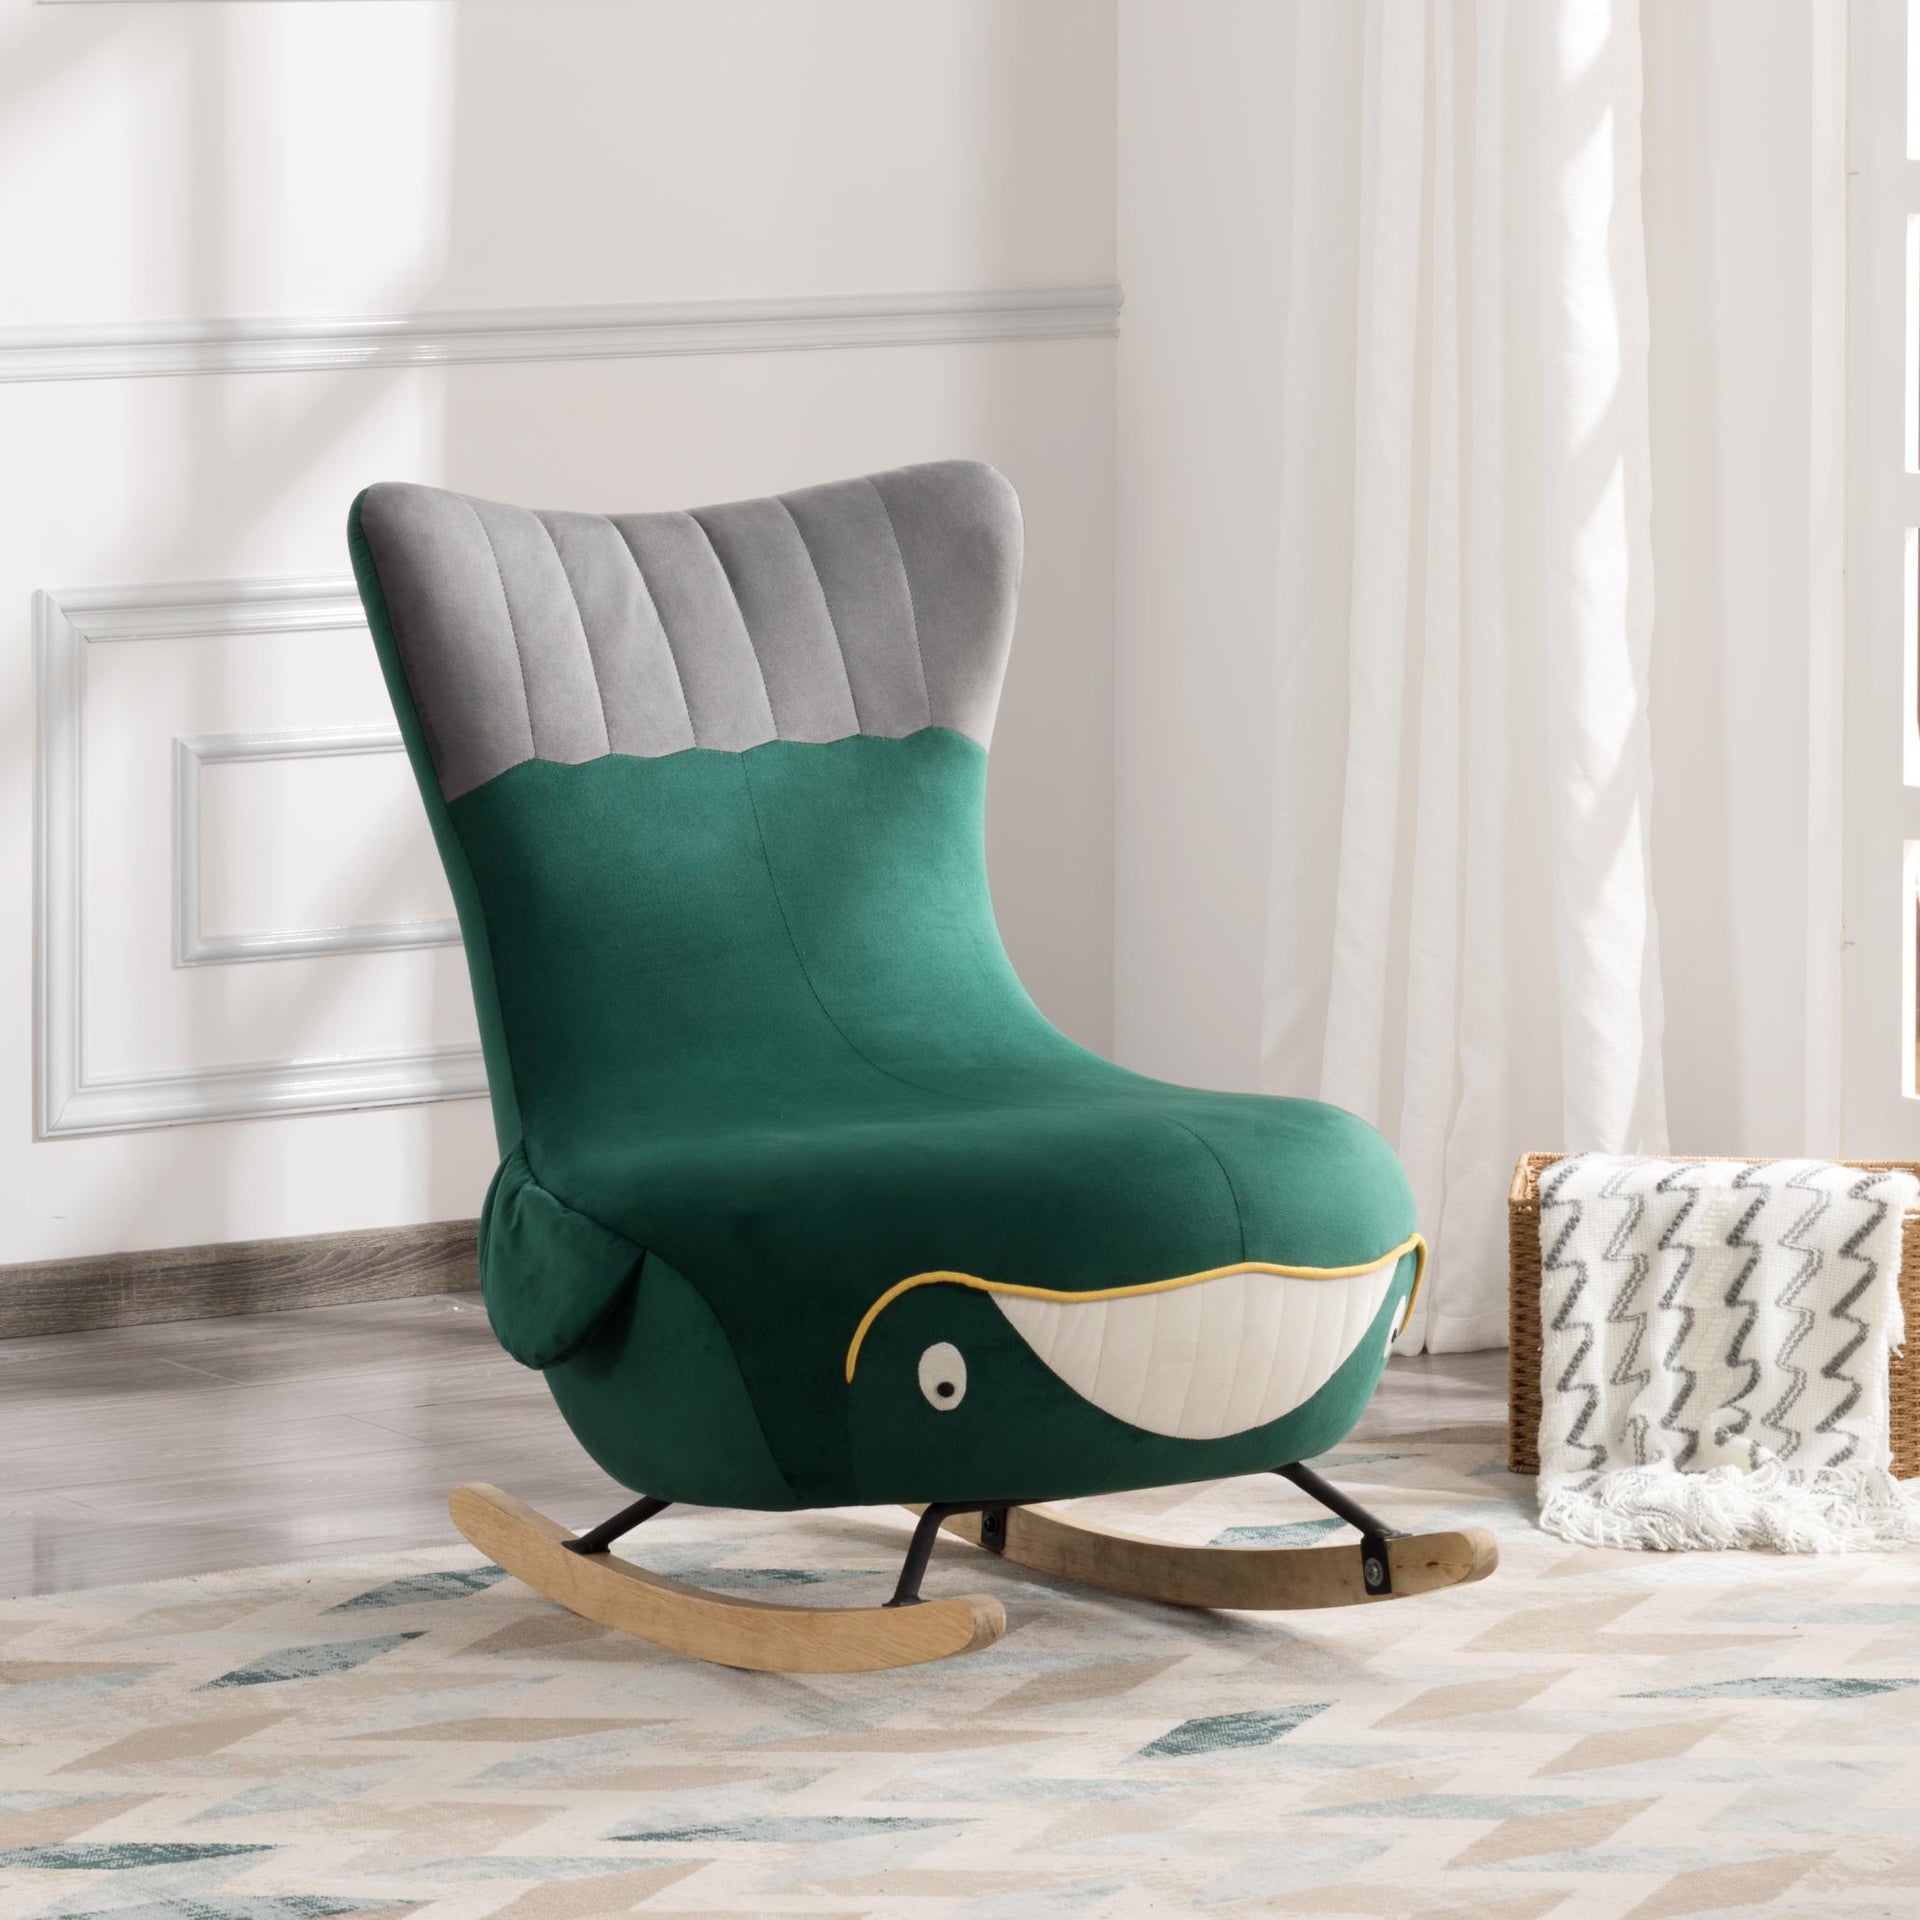 Velvet 27.5” Whale Rocking chair perfect fit every scene, bedroom, living room, porch or office, it can decorate all the places perfectly. Take a moment to relax your body and relieve the fatigue after a hard day of work.